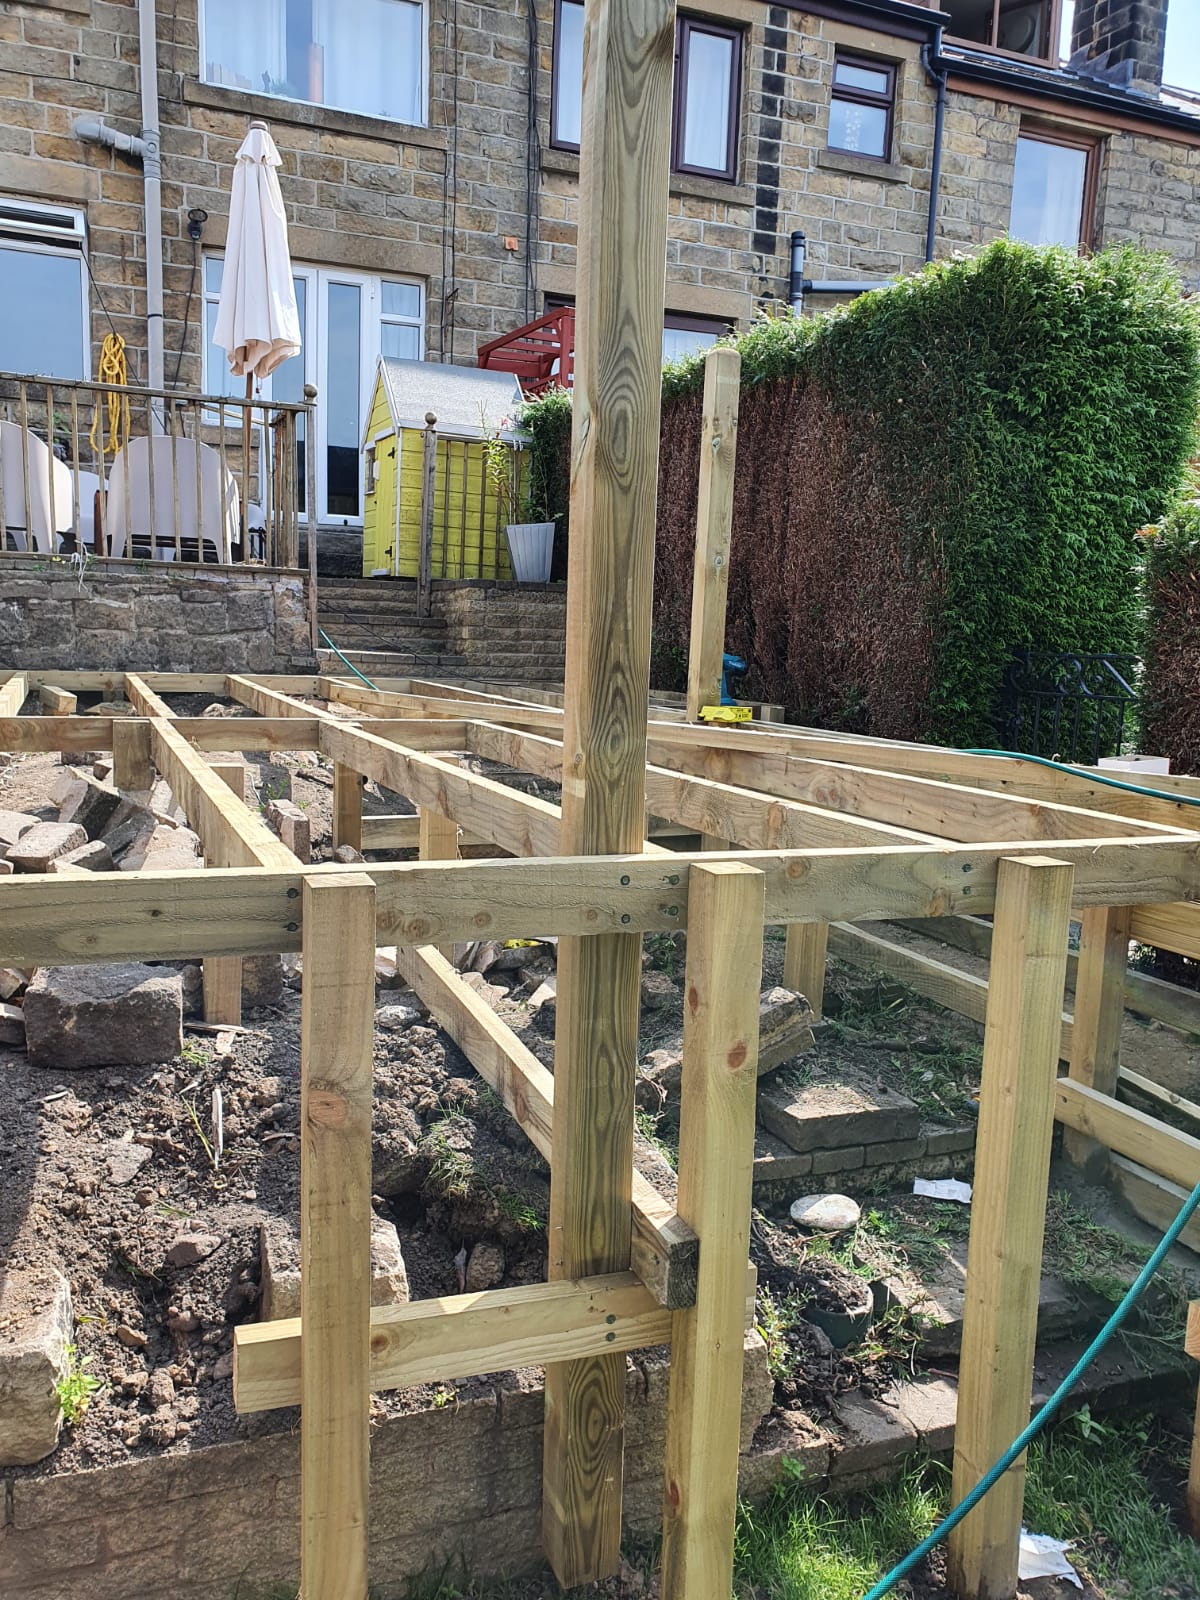 Raised wooden decking being constructed in a Cardiff back garden